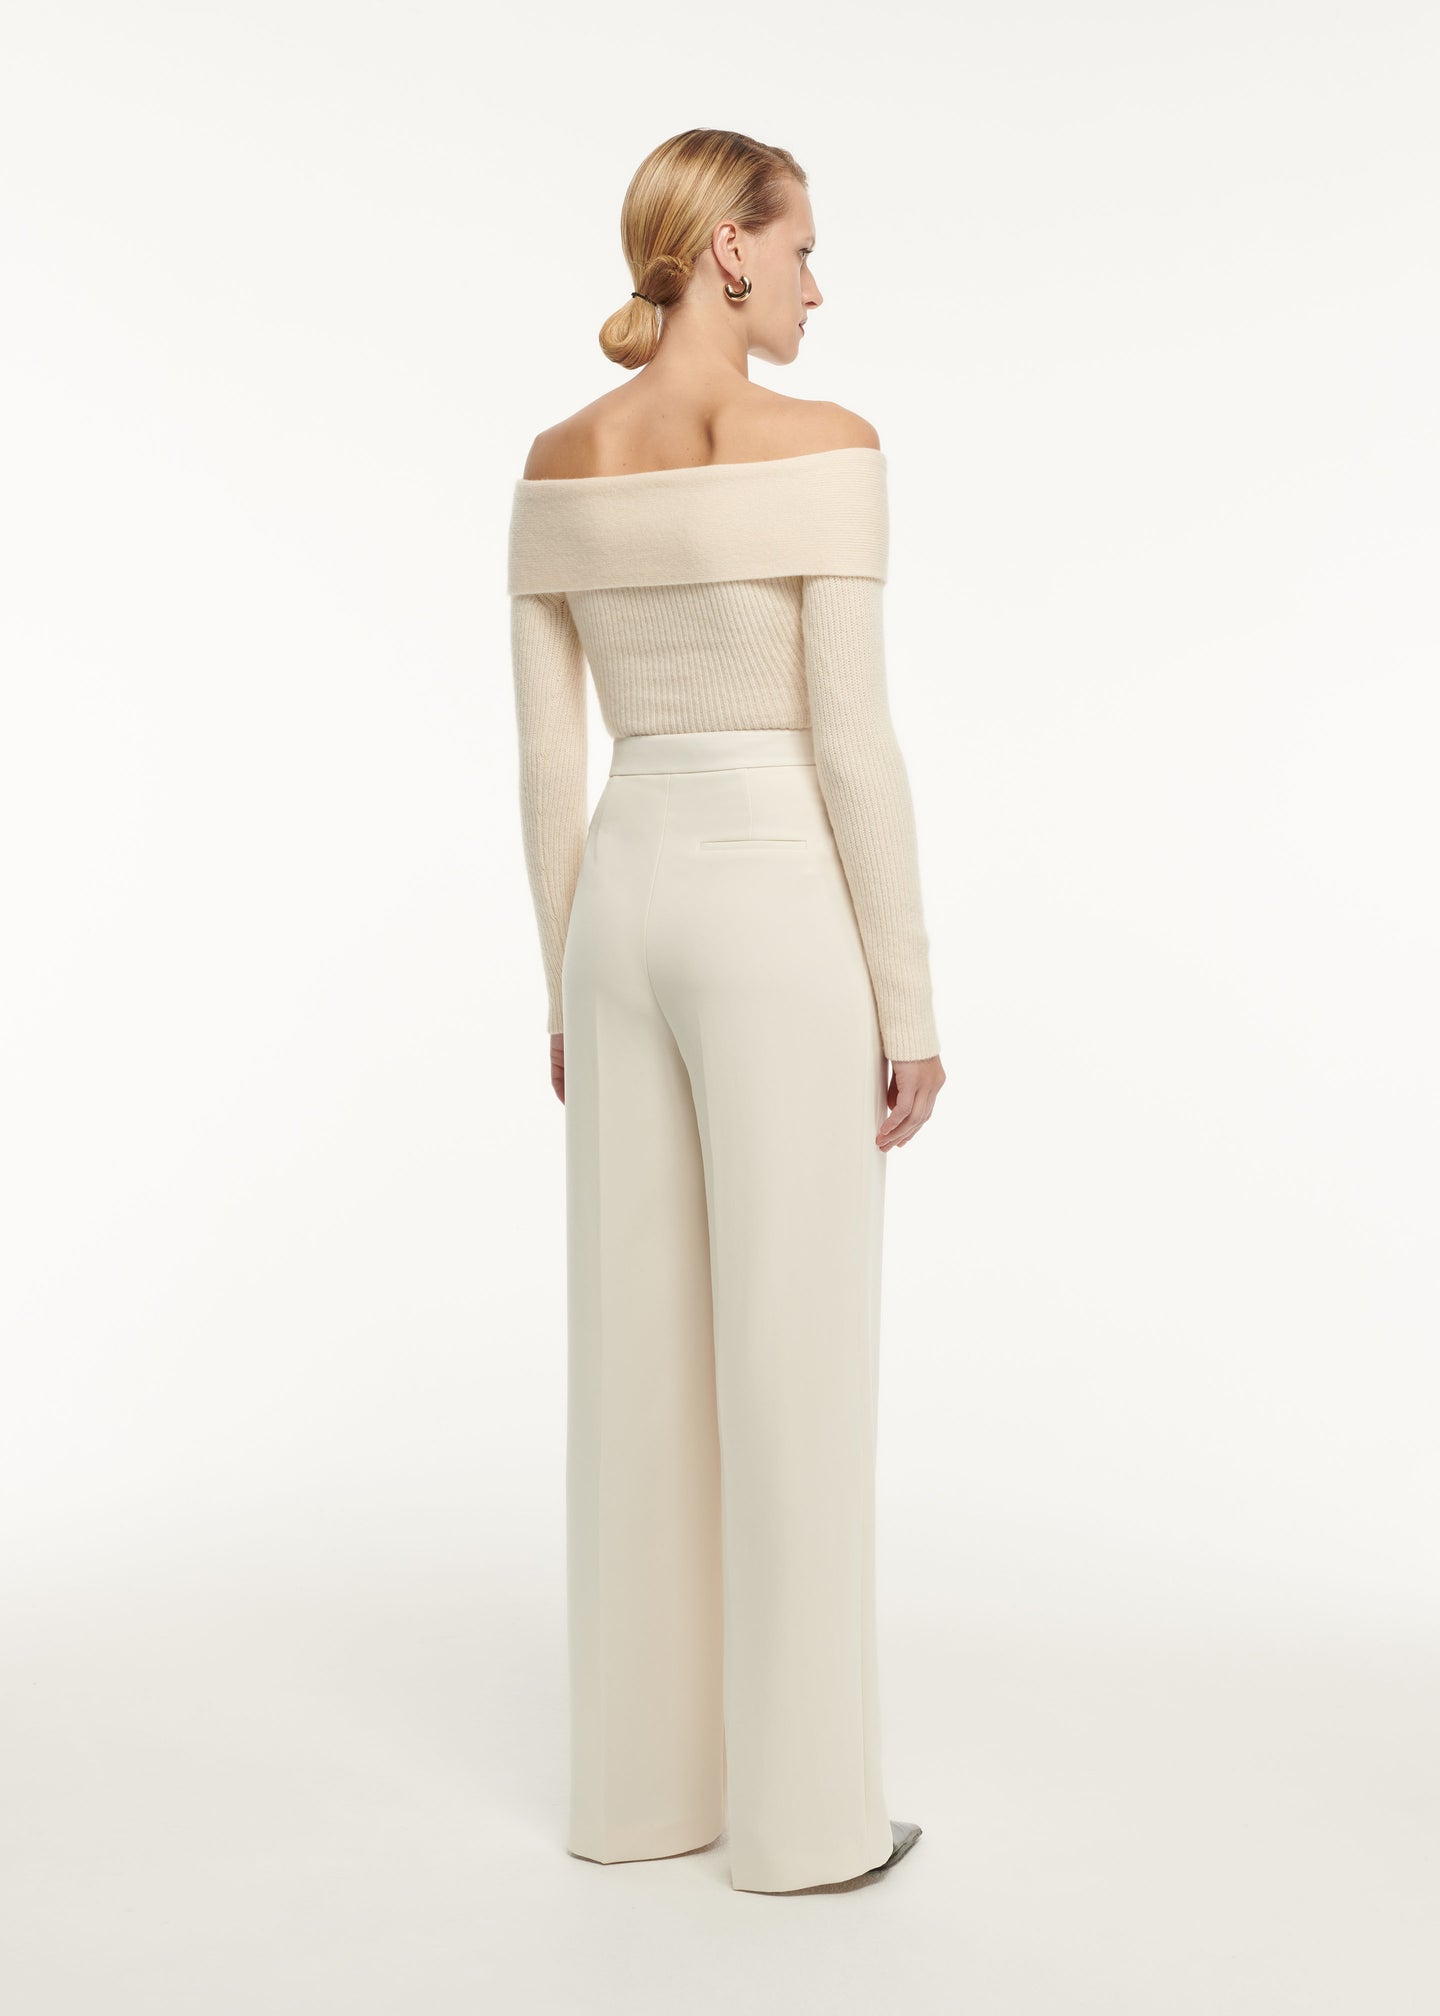 The back of a woman wearing the Long Sleeve Collar Satin Crepe Midi Dress